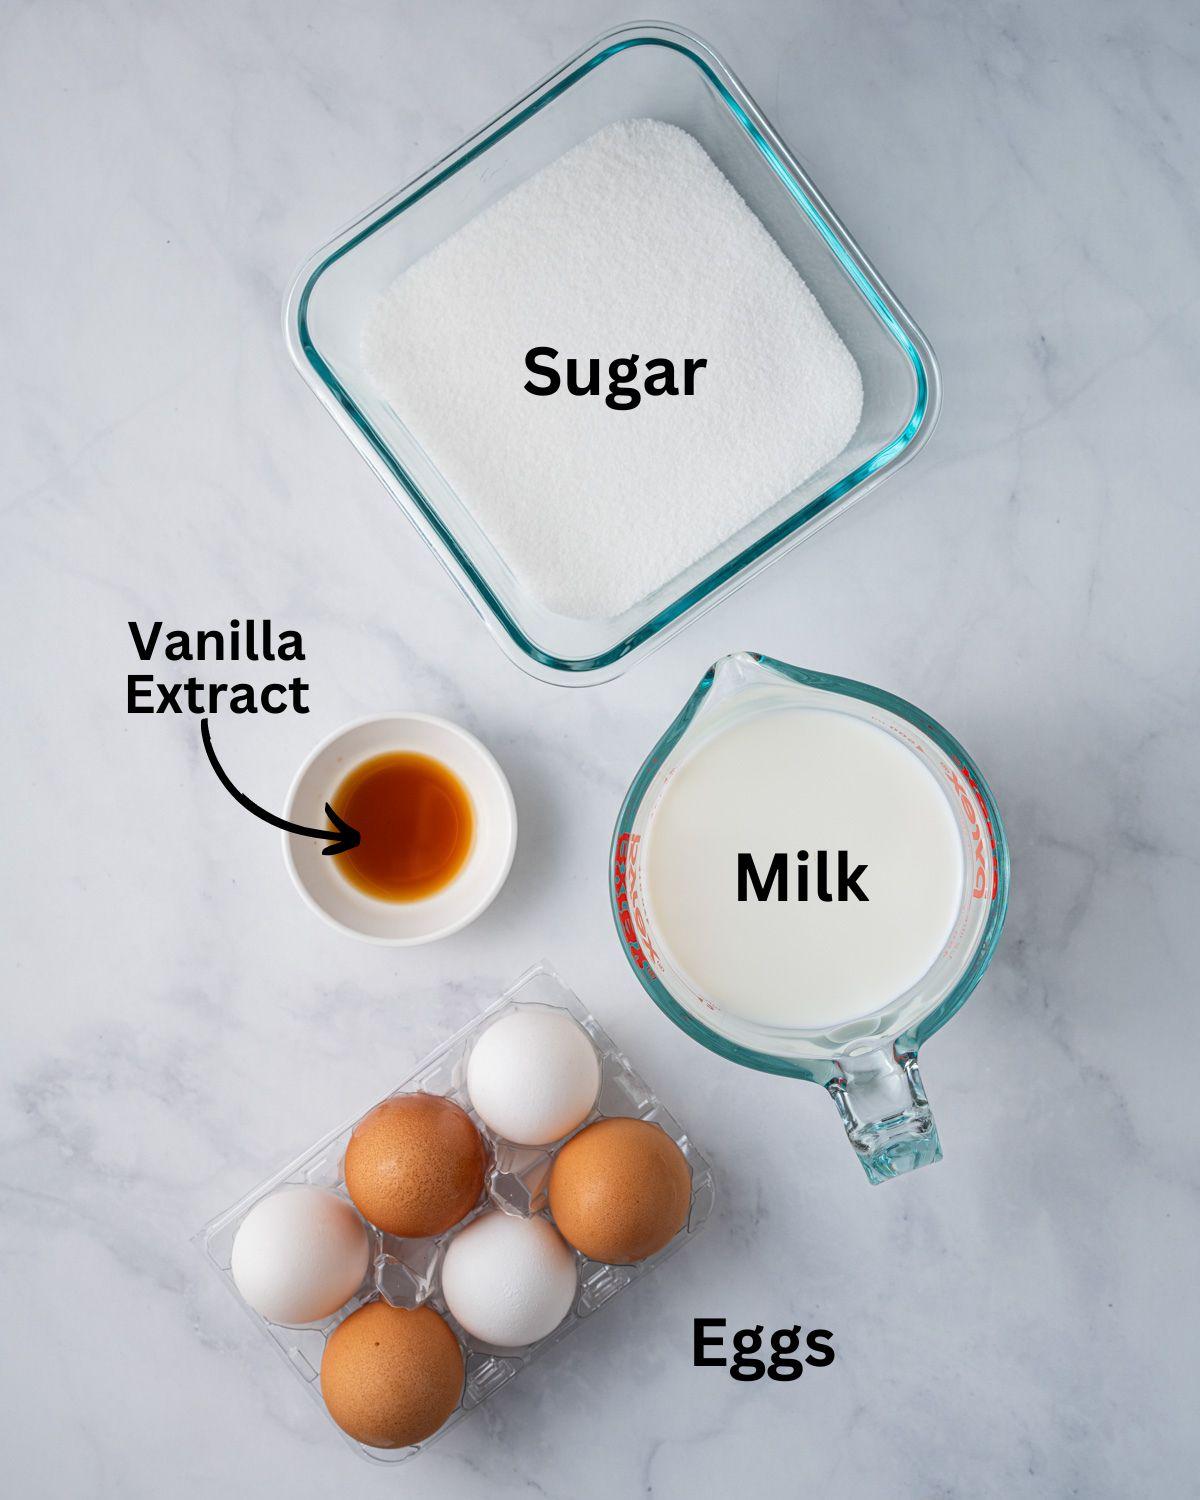 Ingredients needed for banh flan: eggs, milk, sugar, and vanilla extract.